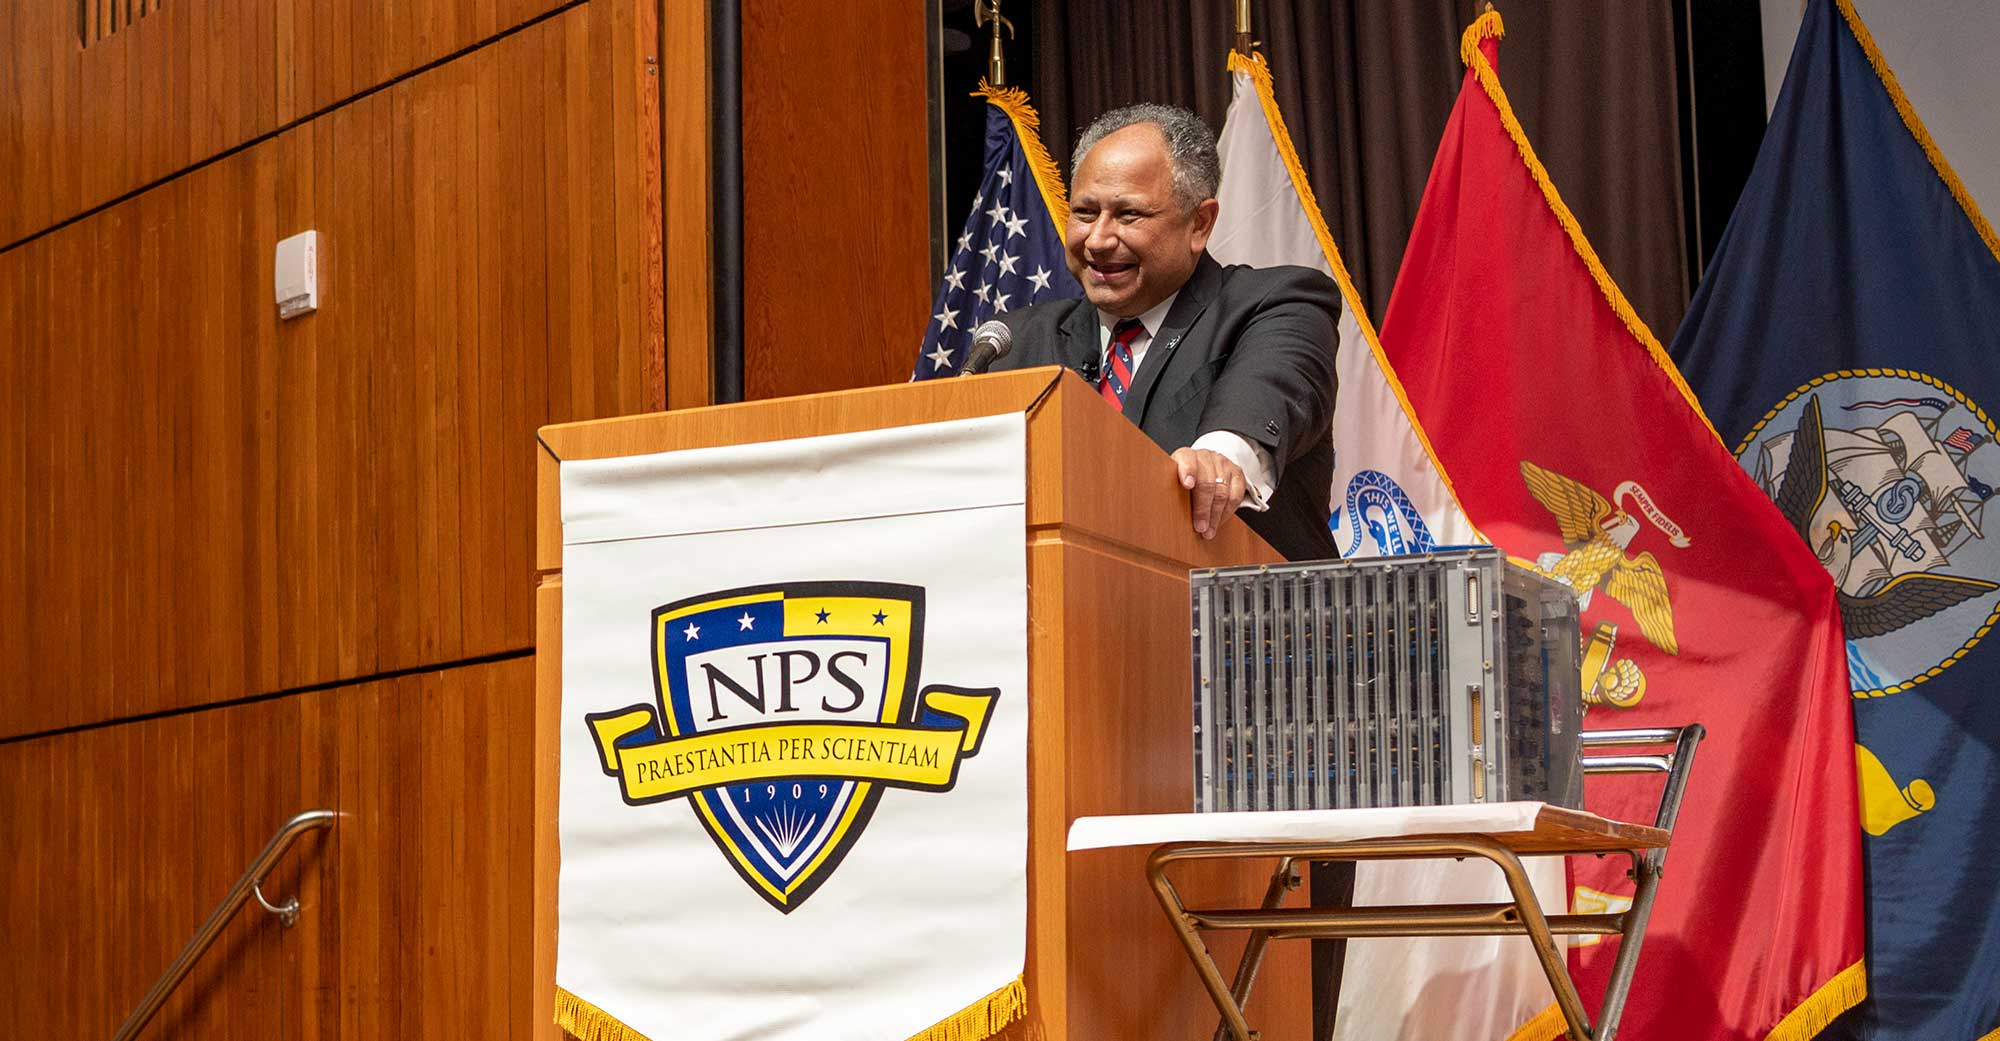 SECNAV Emphasizes Lifelong Learning as a ‘Strategic Imperative’ During NPS Guest Lecture